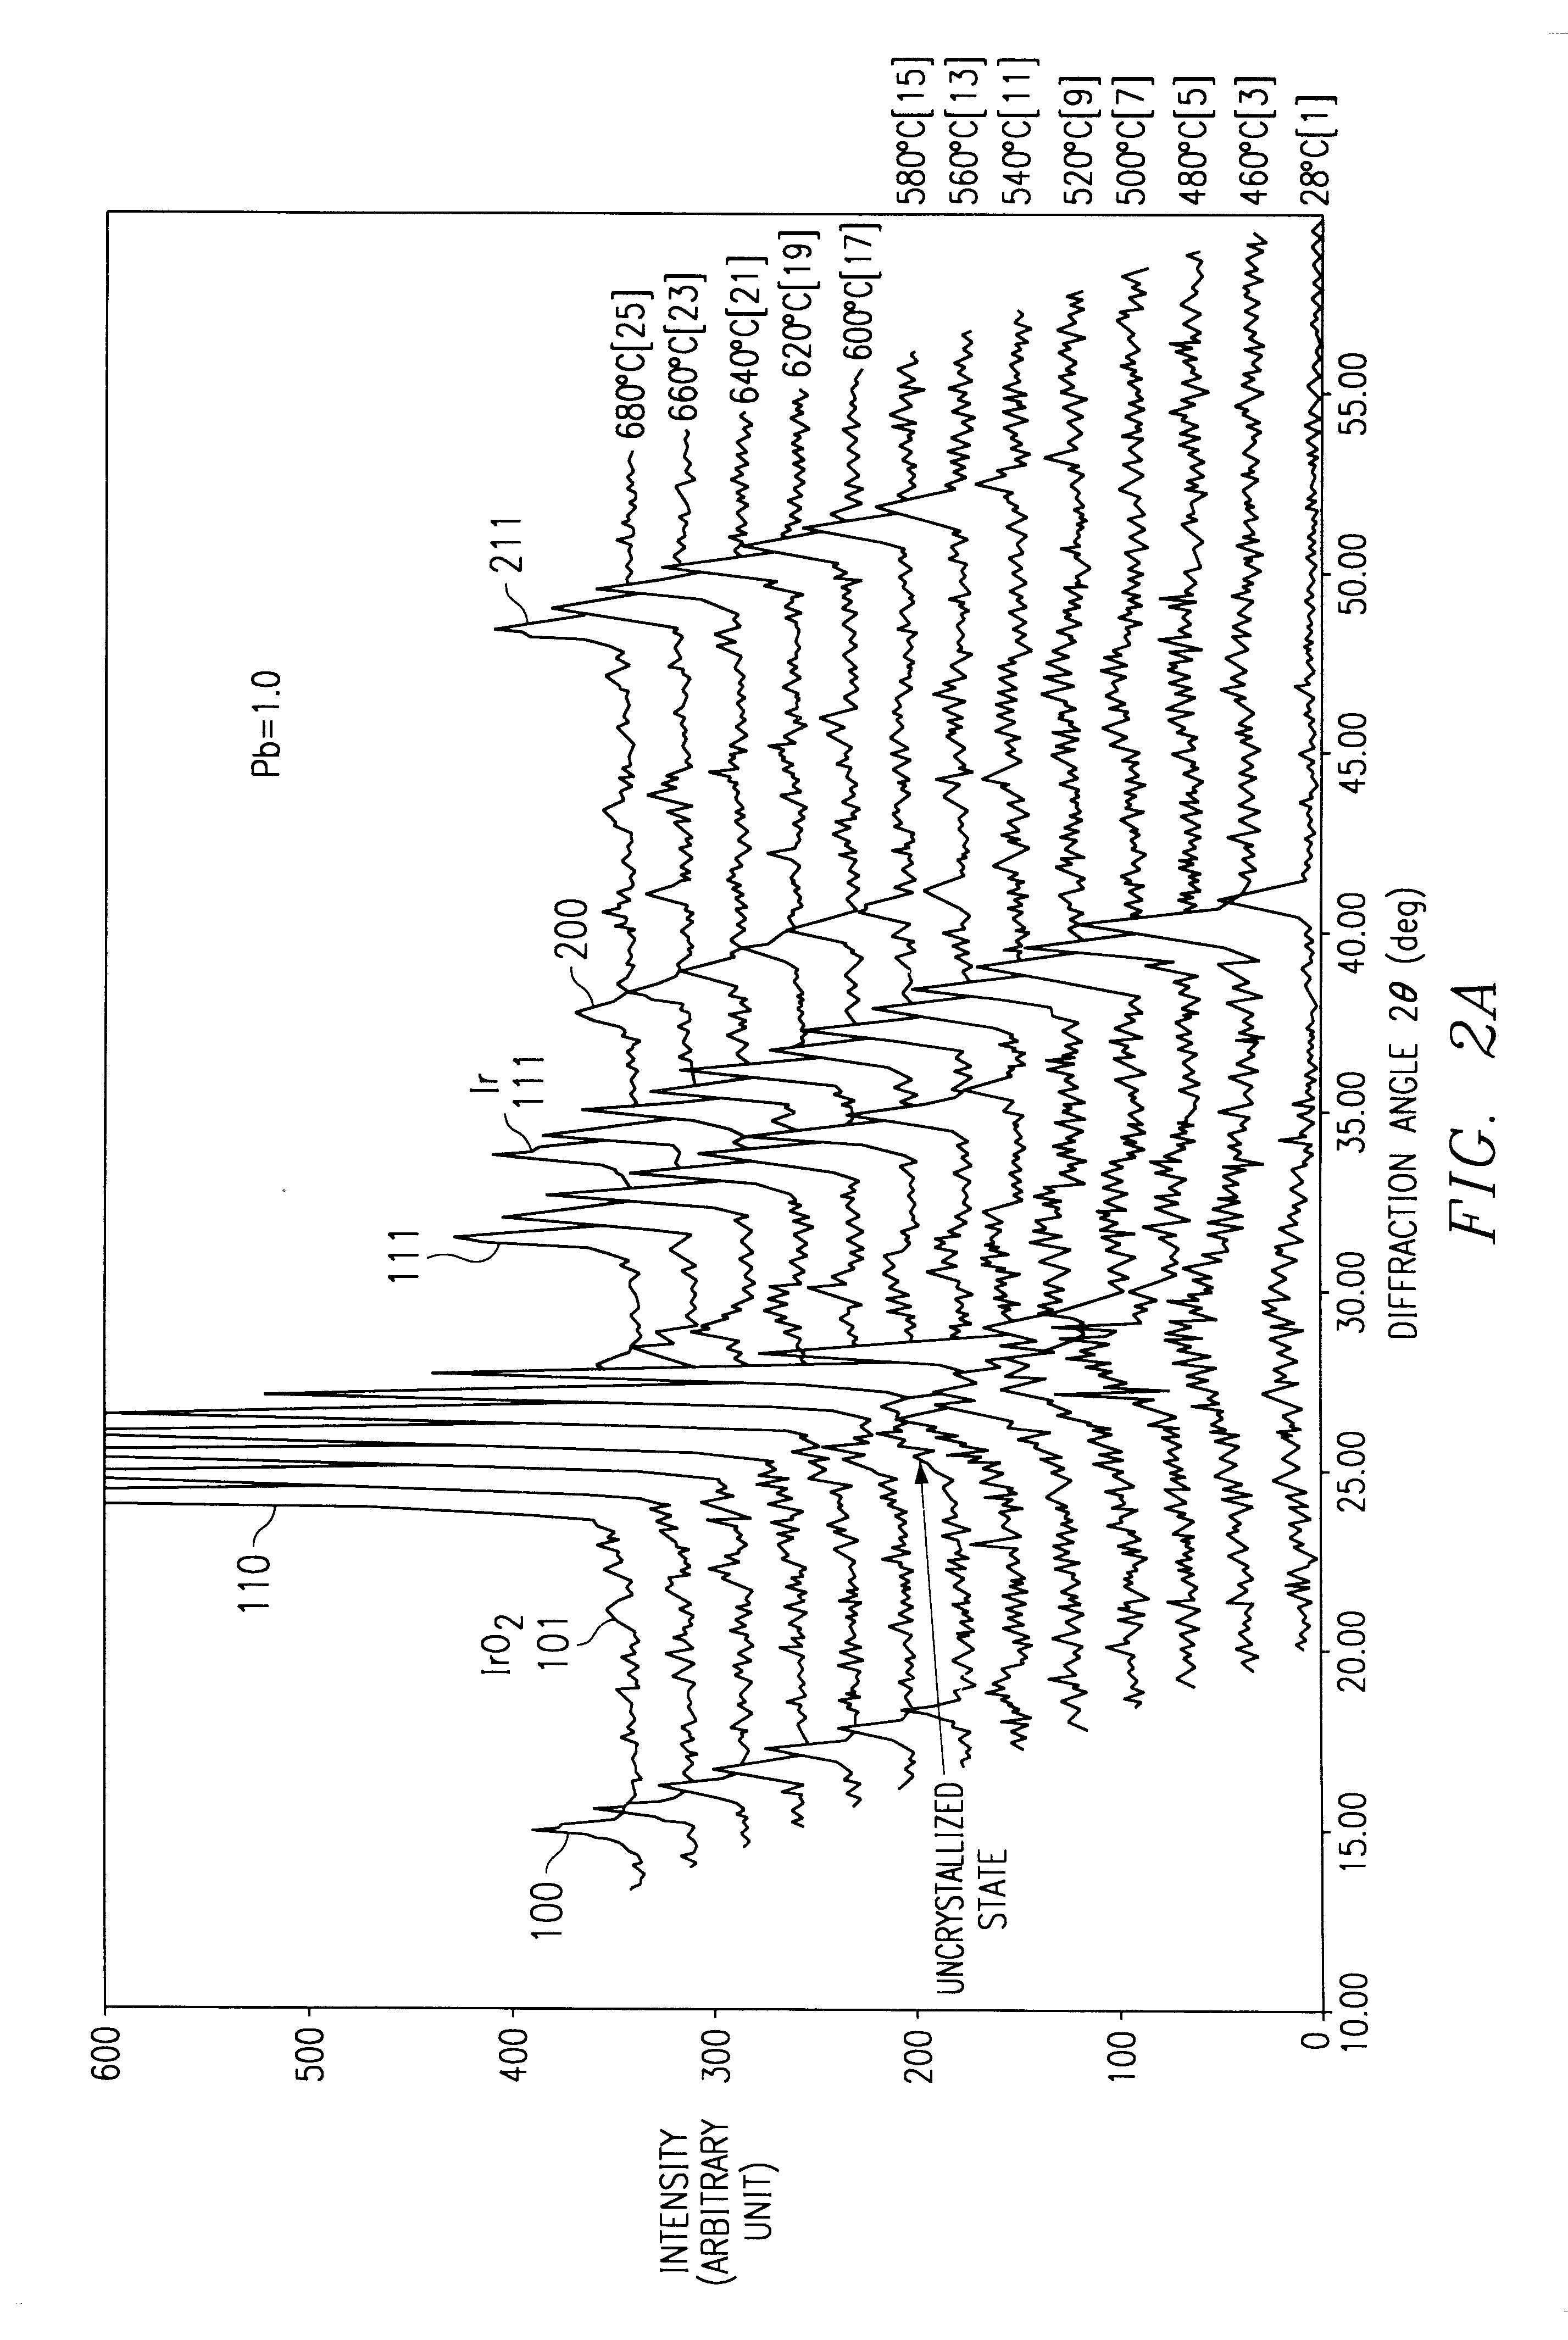 Method for manufacturing a ferroelectric capacitor having improved polarization characteristics and a method for manufacturing a ferroelectric memory device incorporating such capacitor